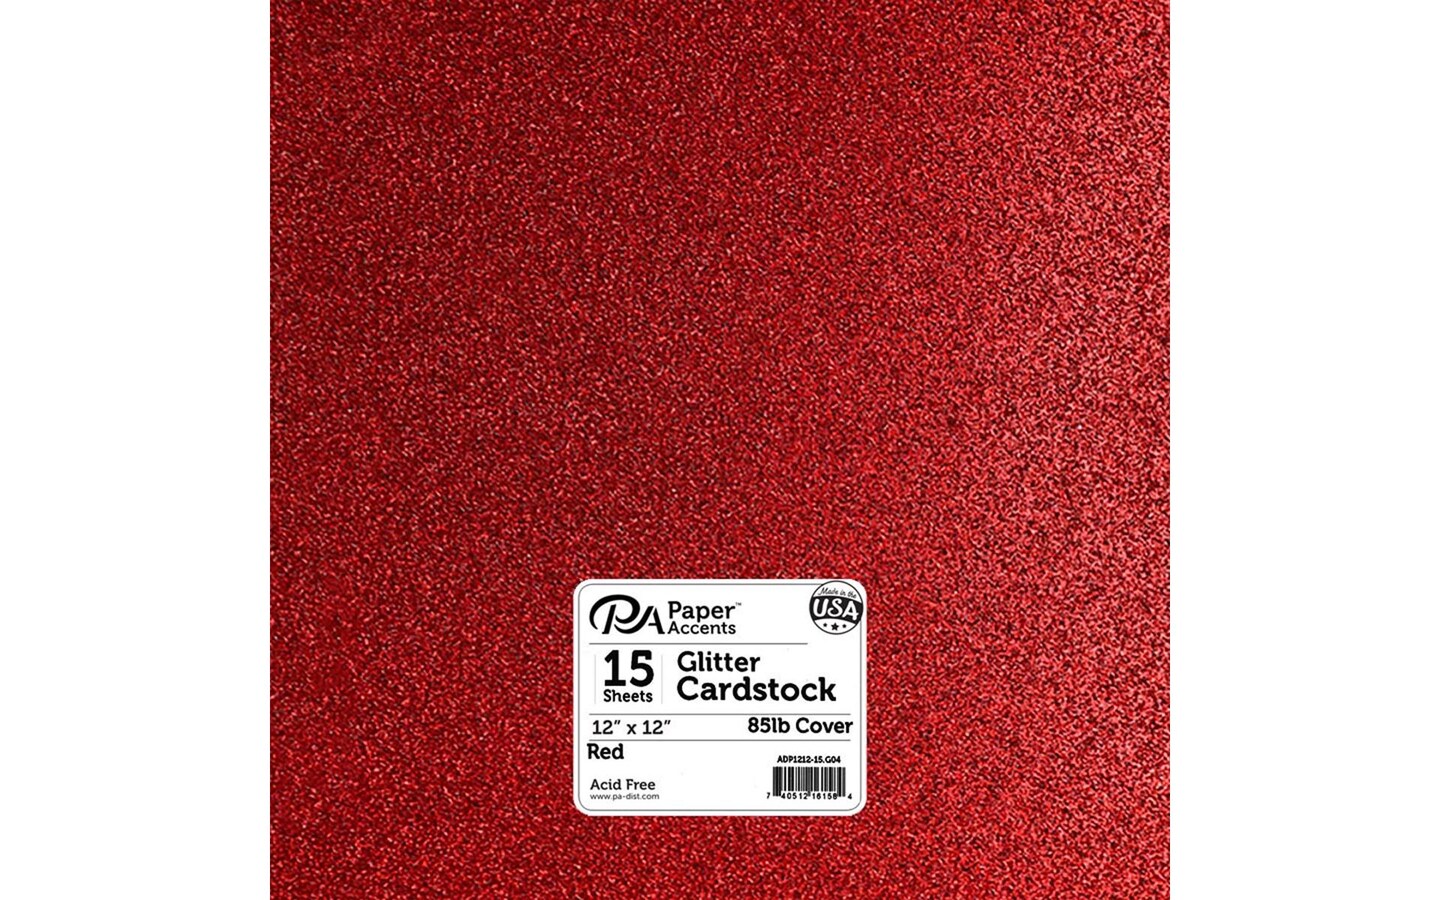 PA Paper Accents Glitter Cardstock 12&#x22; x 12&#x22; Red, 85lb colored cardstock paper for card making, scrapbooking, printing, quilling and crafts, 15 piece pack